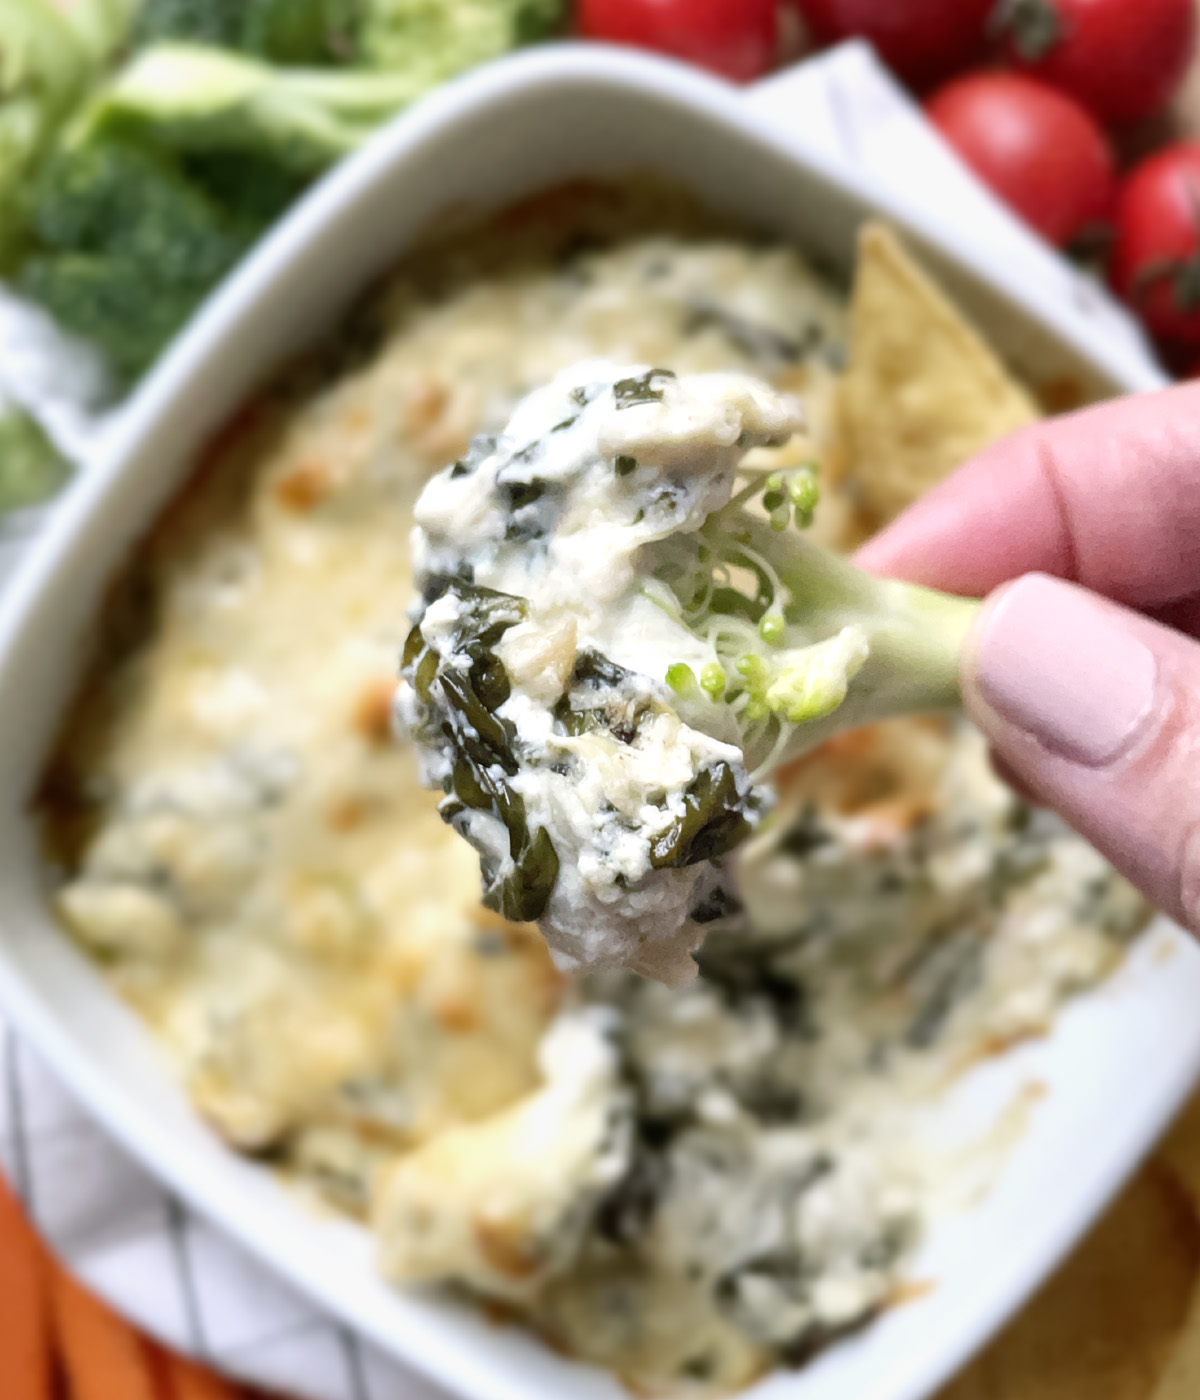 Close-up of a hand holding a piece of broccoli with spinach artichoke dip on it.